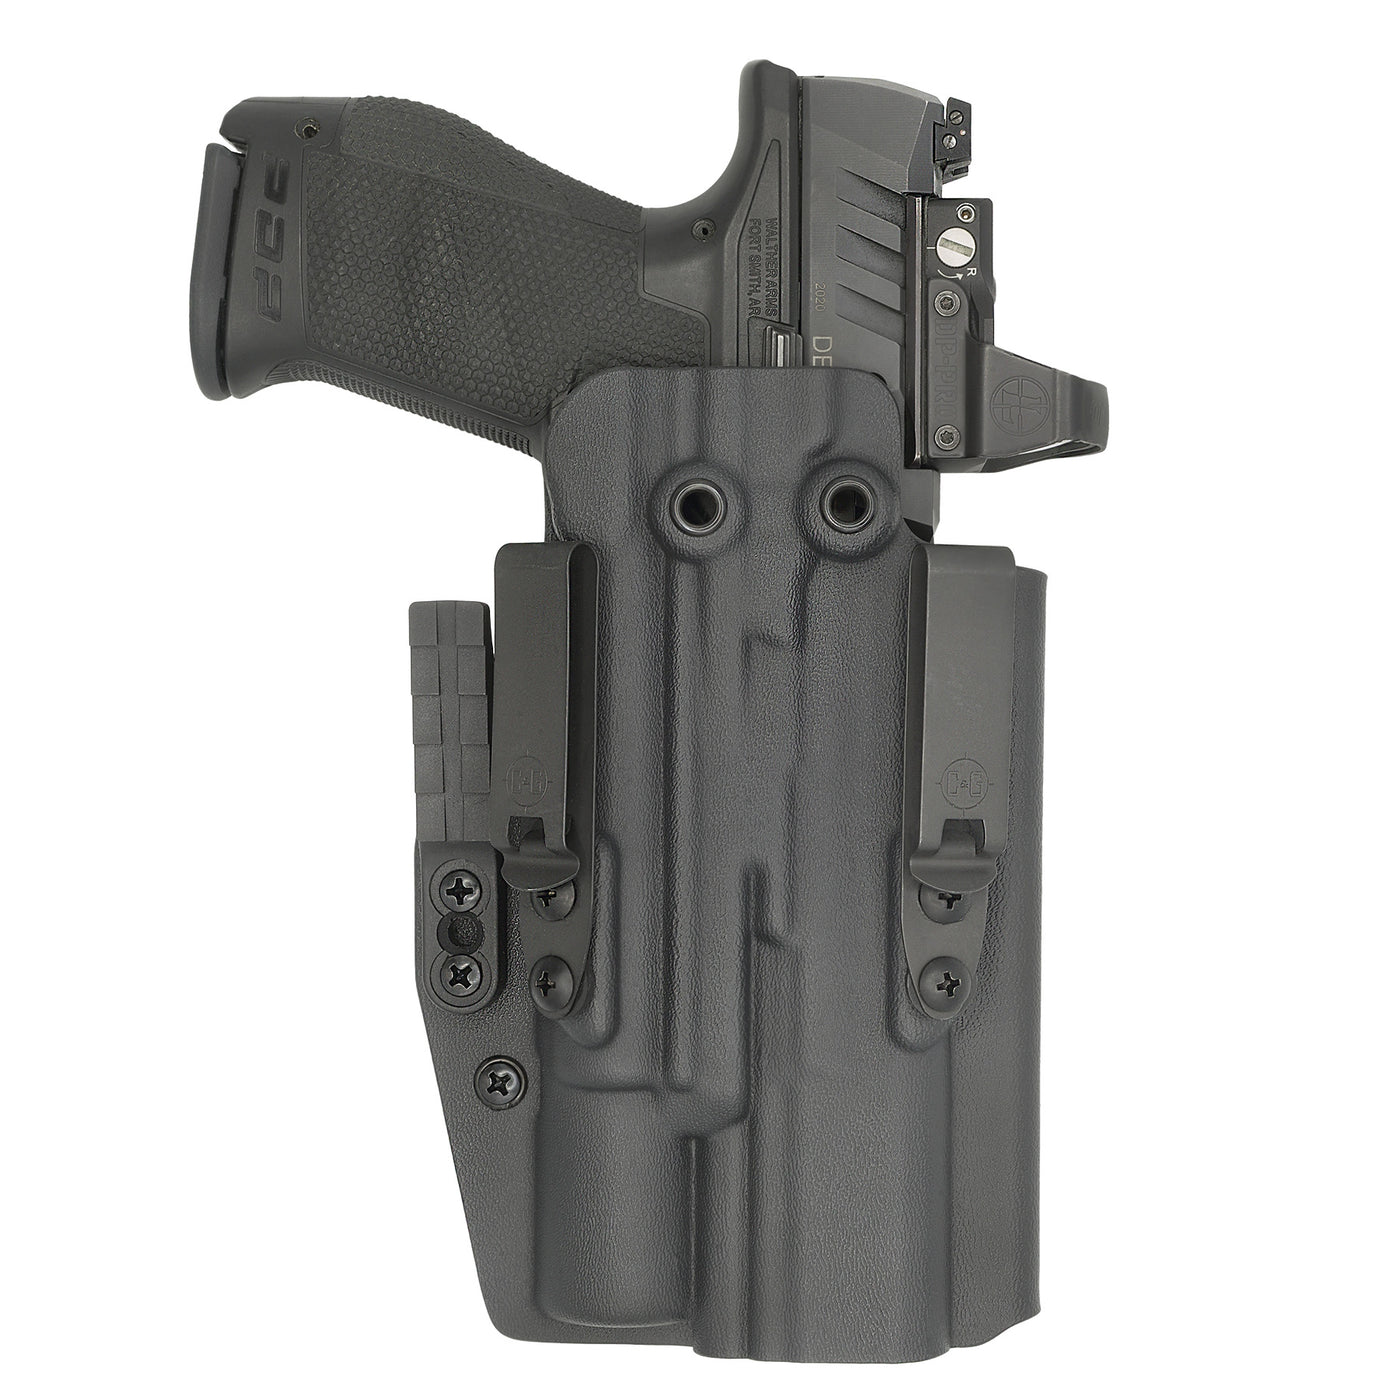 C&G Holsters custom IWB Tactical ALPHA UPGRADE CZ P07/09 Surefire X300 in holstered position